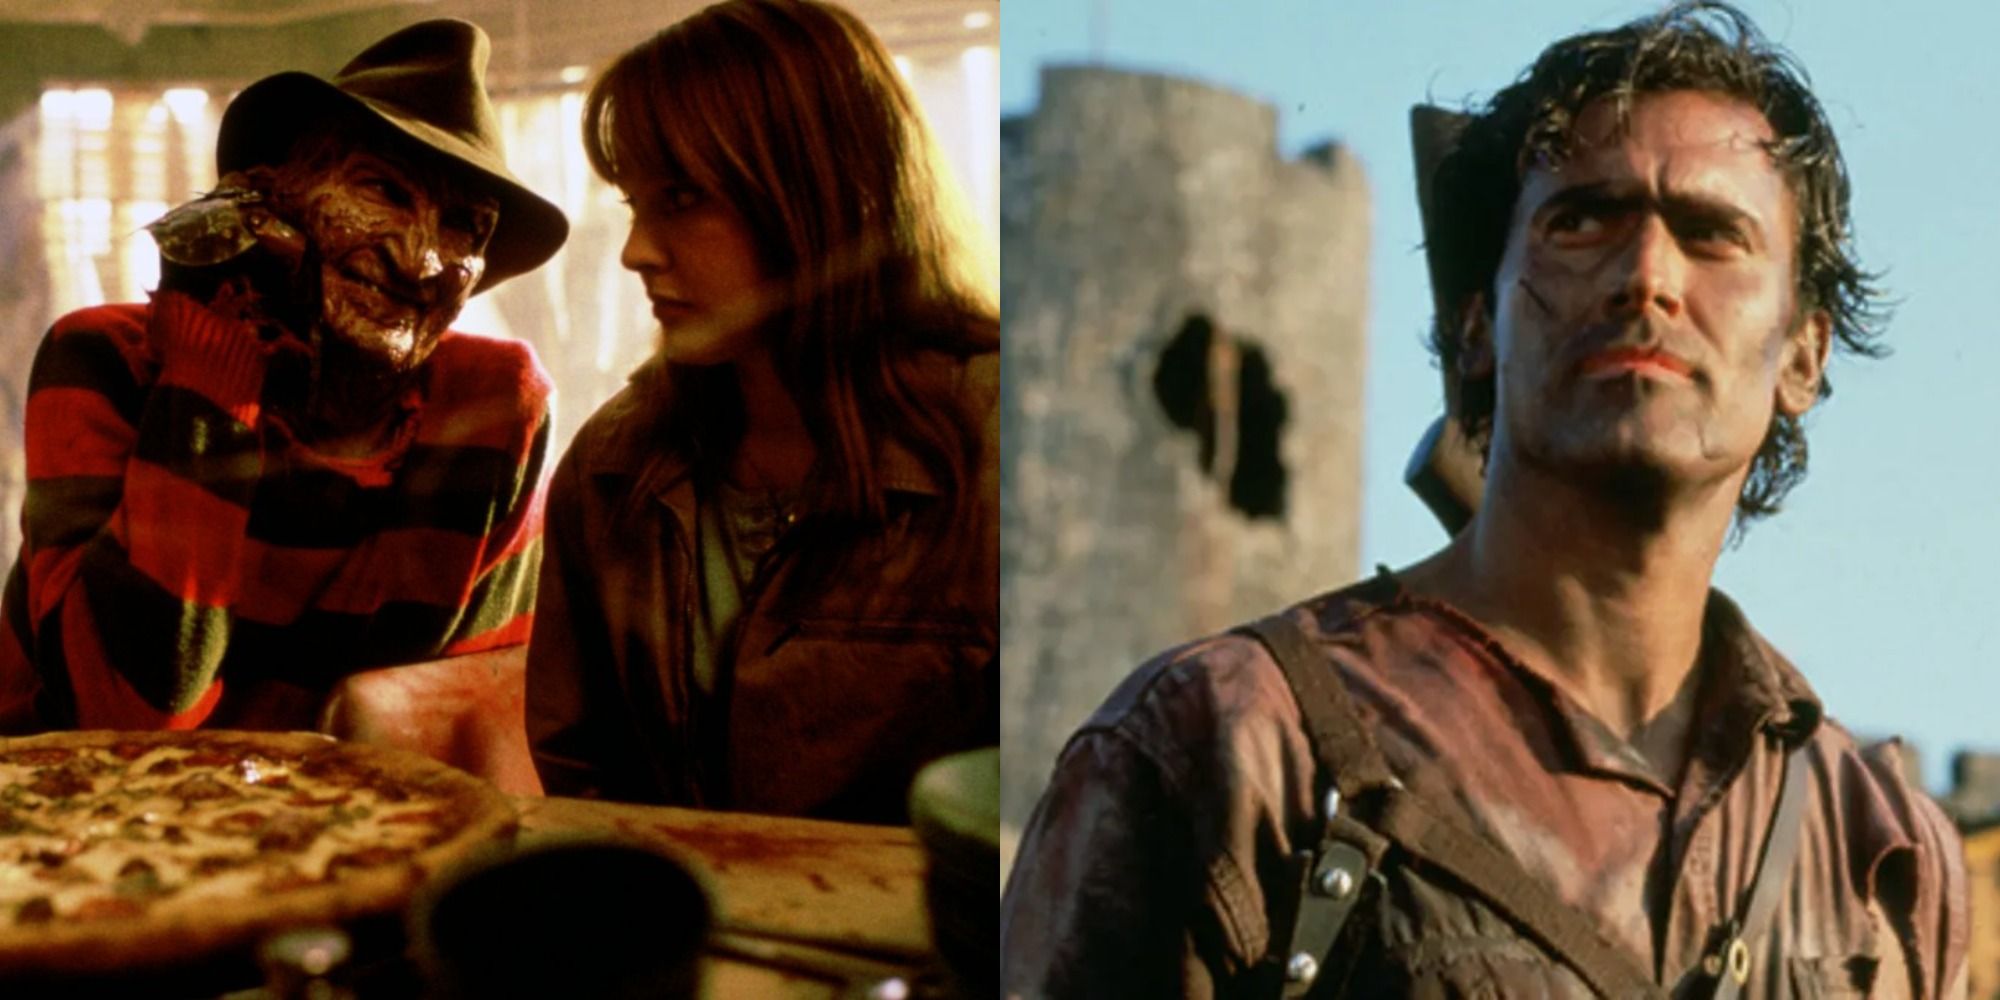 Freddy & Alice Nightmare 4 split with Bruce Campbell in Army of Darkness